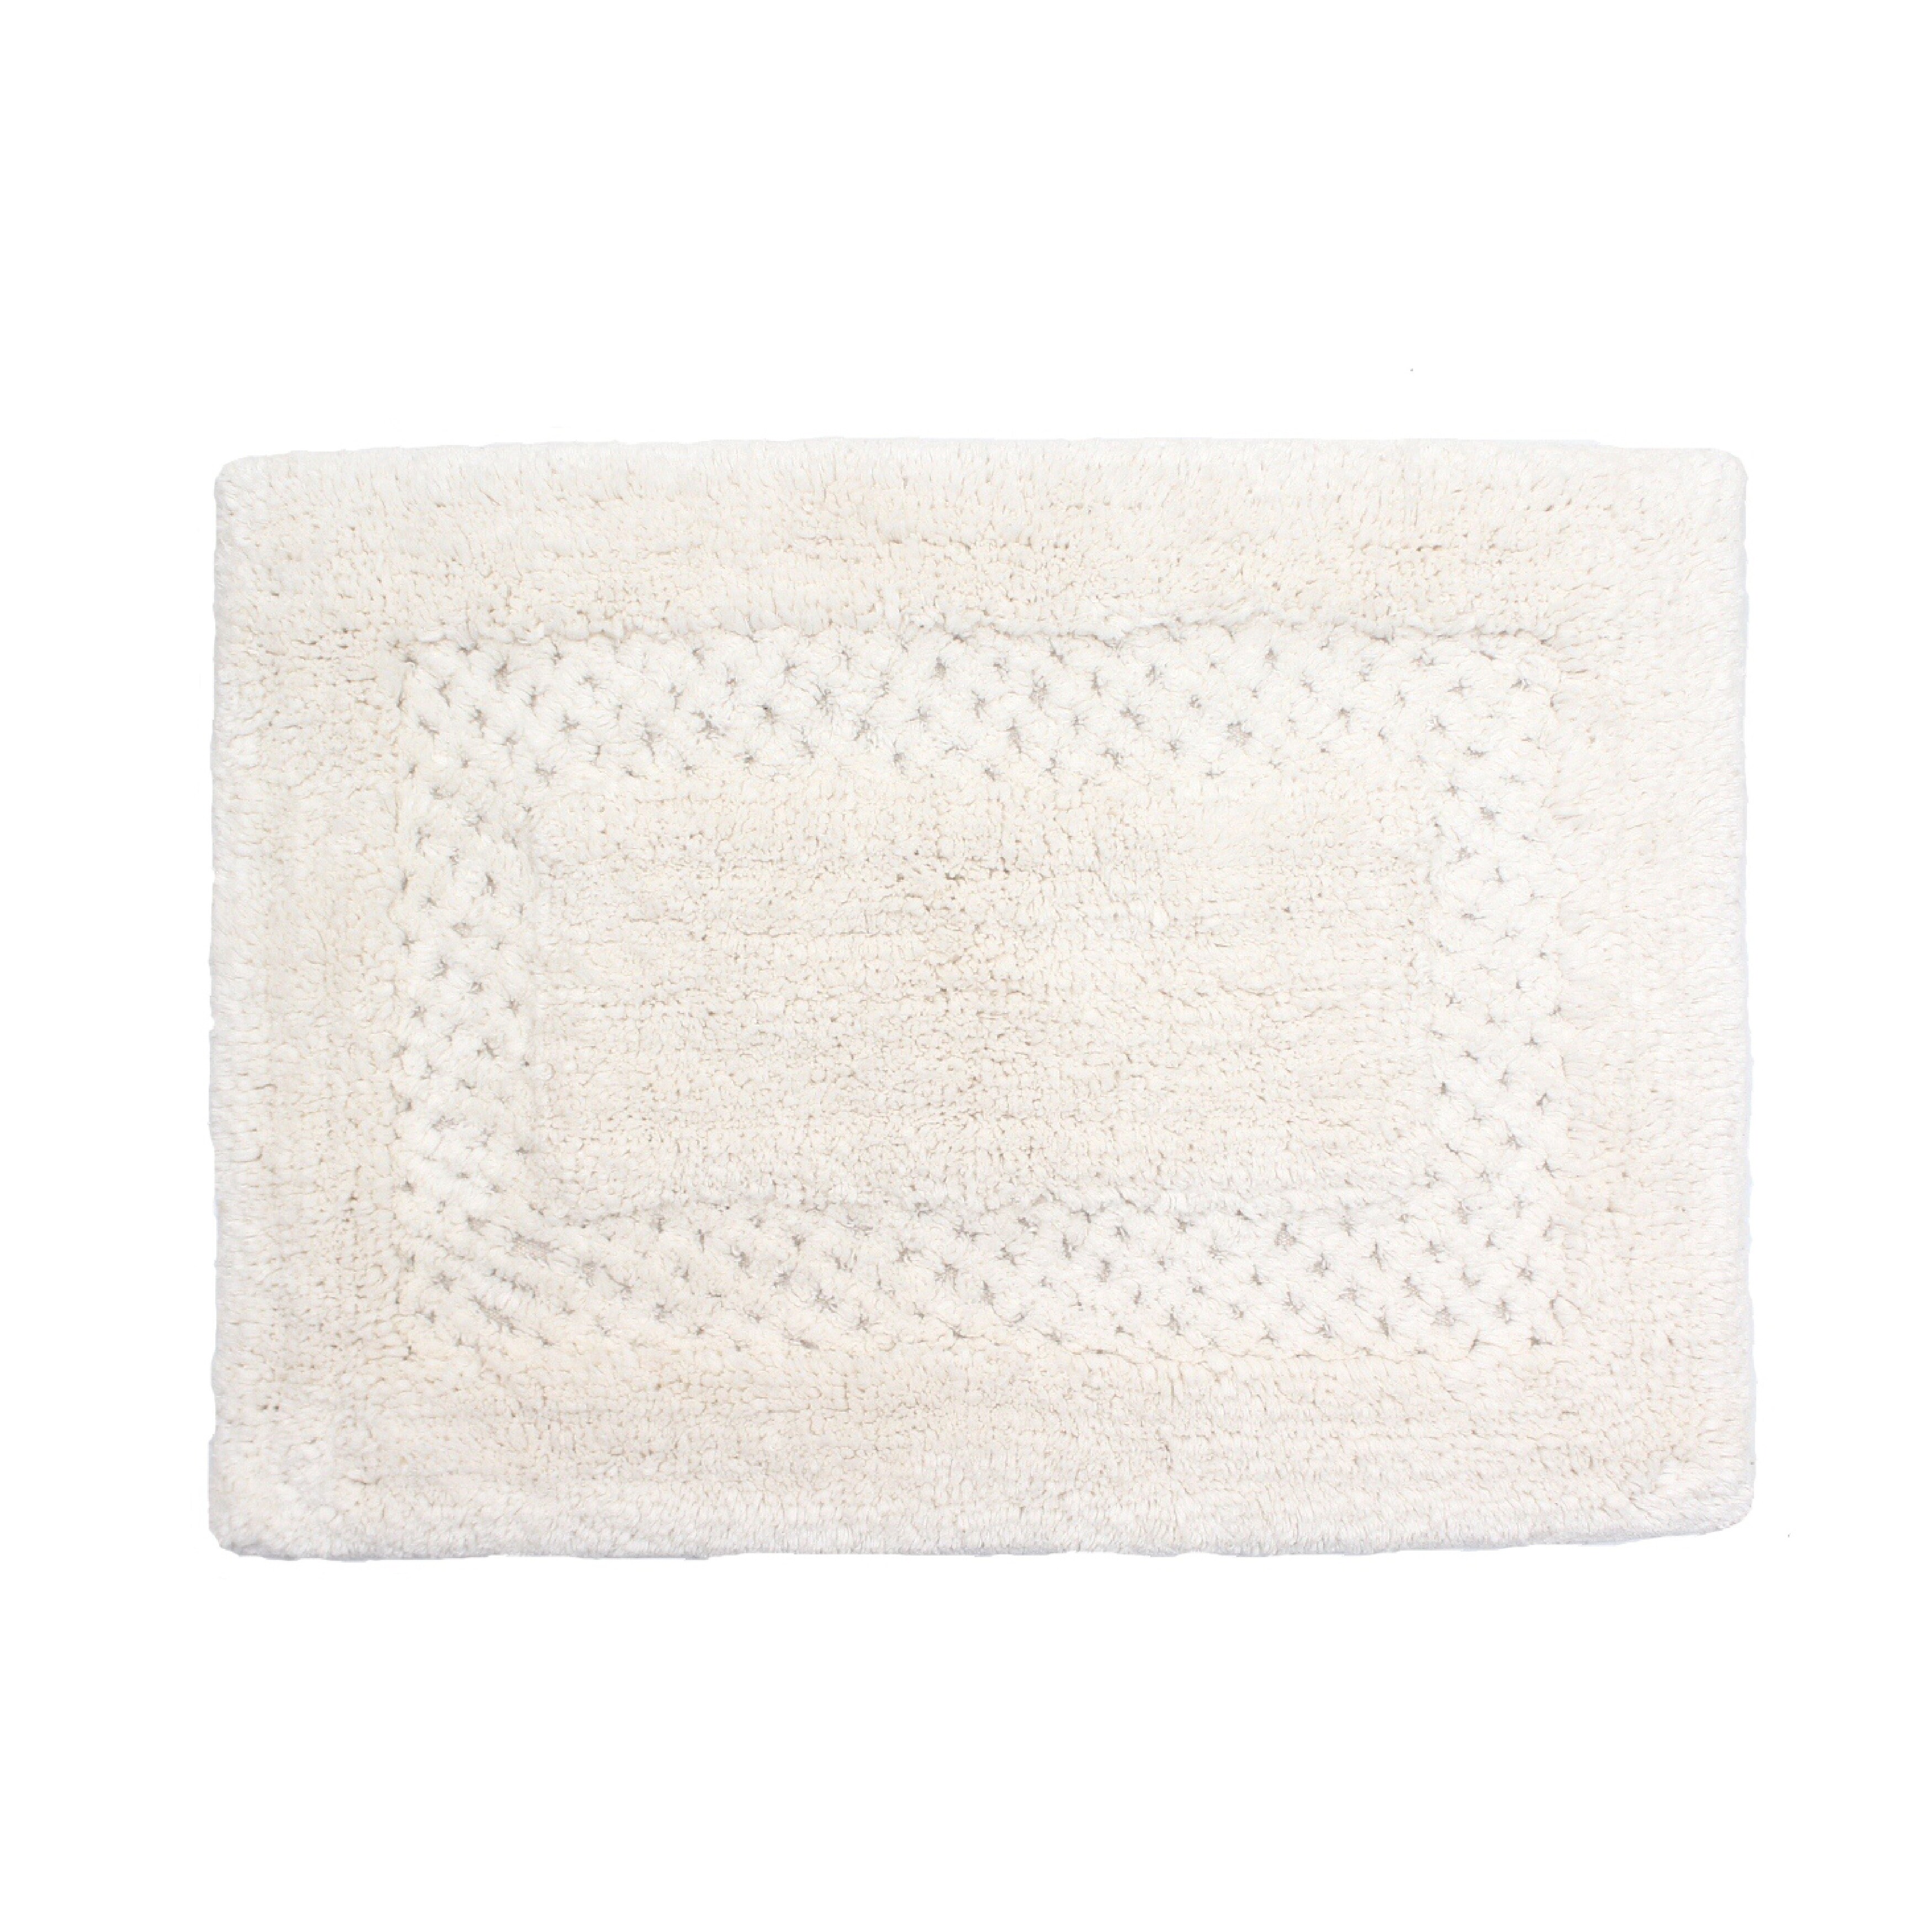 https://ak1.ostkcdn.com/images/products/is/images/direct/11005600b5da22bfdfa53dfb21b40ad20f87ae2d/Classy-Bathmat-Collection---Absorbent-Cotton-Soft-Bath-Rug%2C-Machine-Washable.jpg